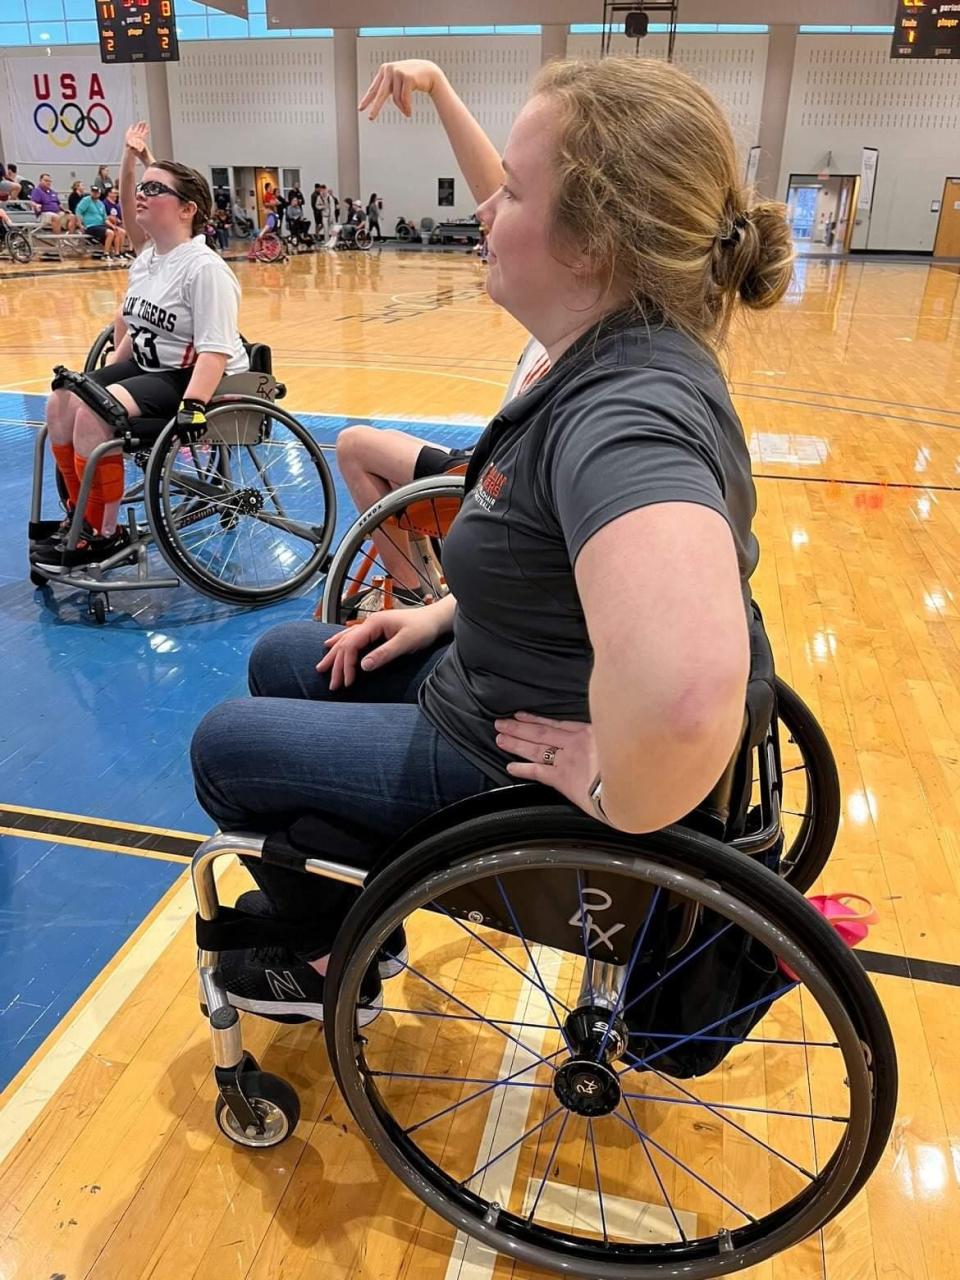 Lindsey Metz, before the title game of a tournament in Birmingham, Ala. The Roger C. Peace Rollin' Tigers Junior wheelchair basketball team won, claiming the trophy.